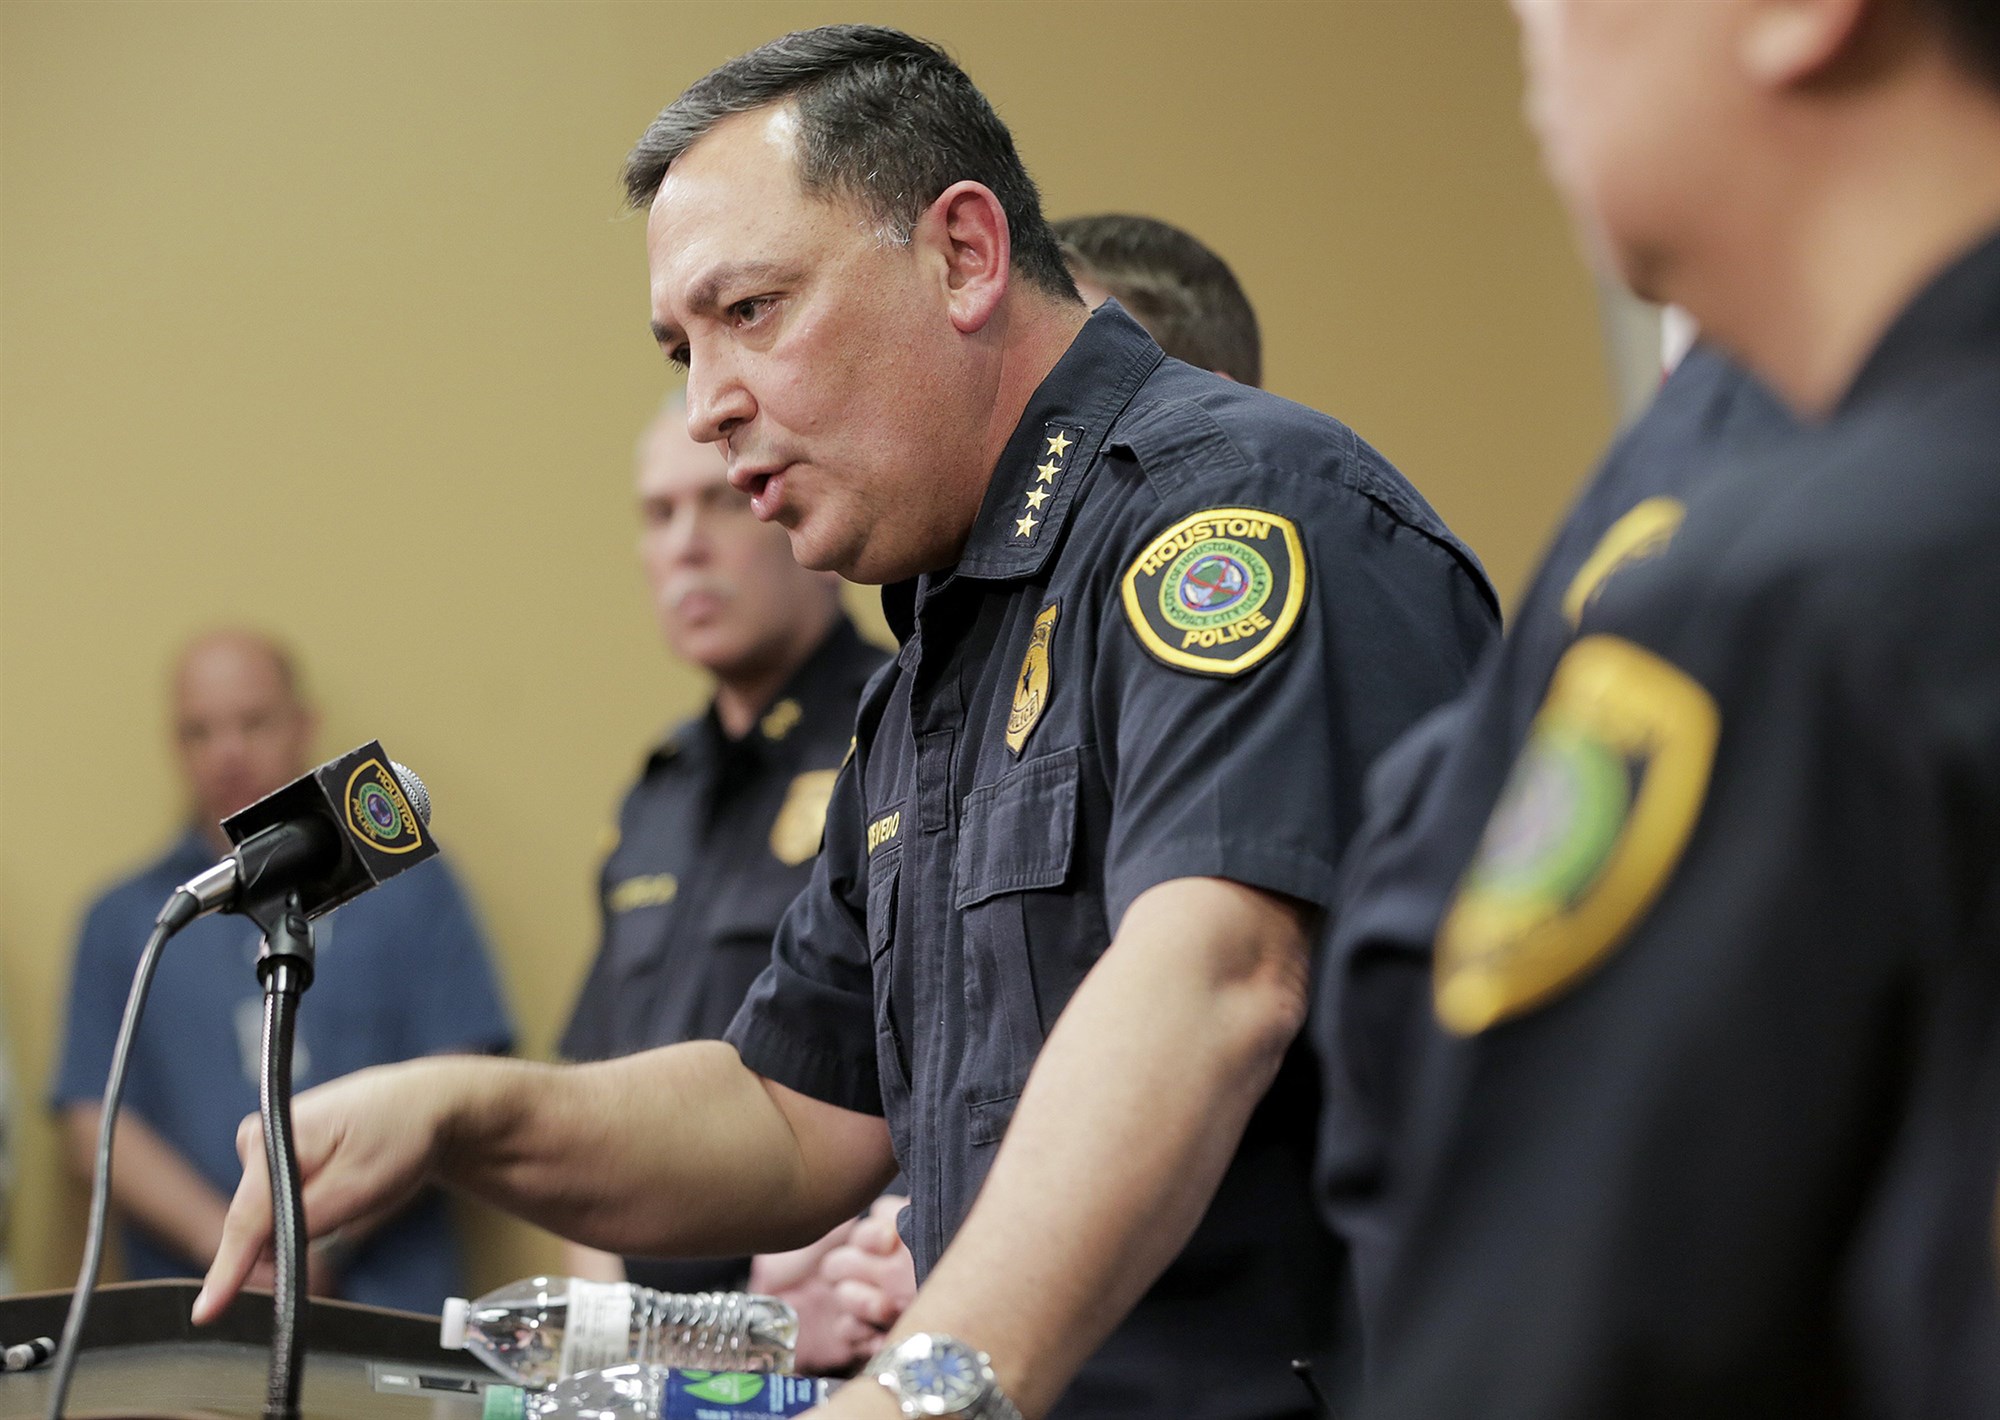 Houston police will end no-knock warrants after deadly drug raid, chief says